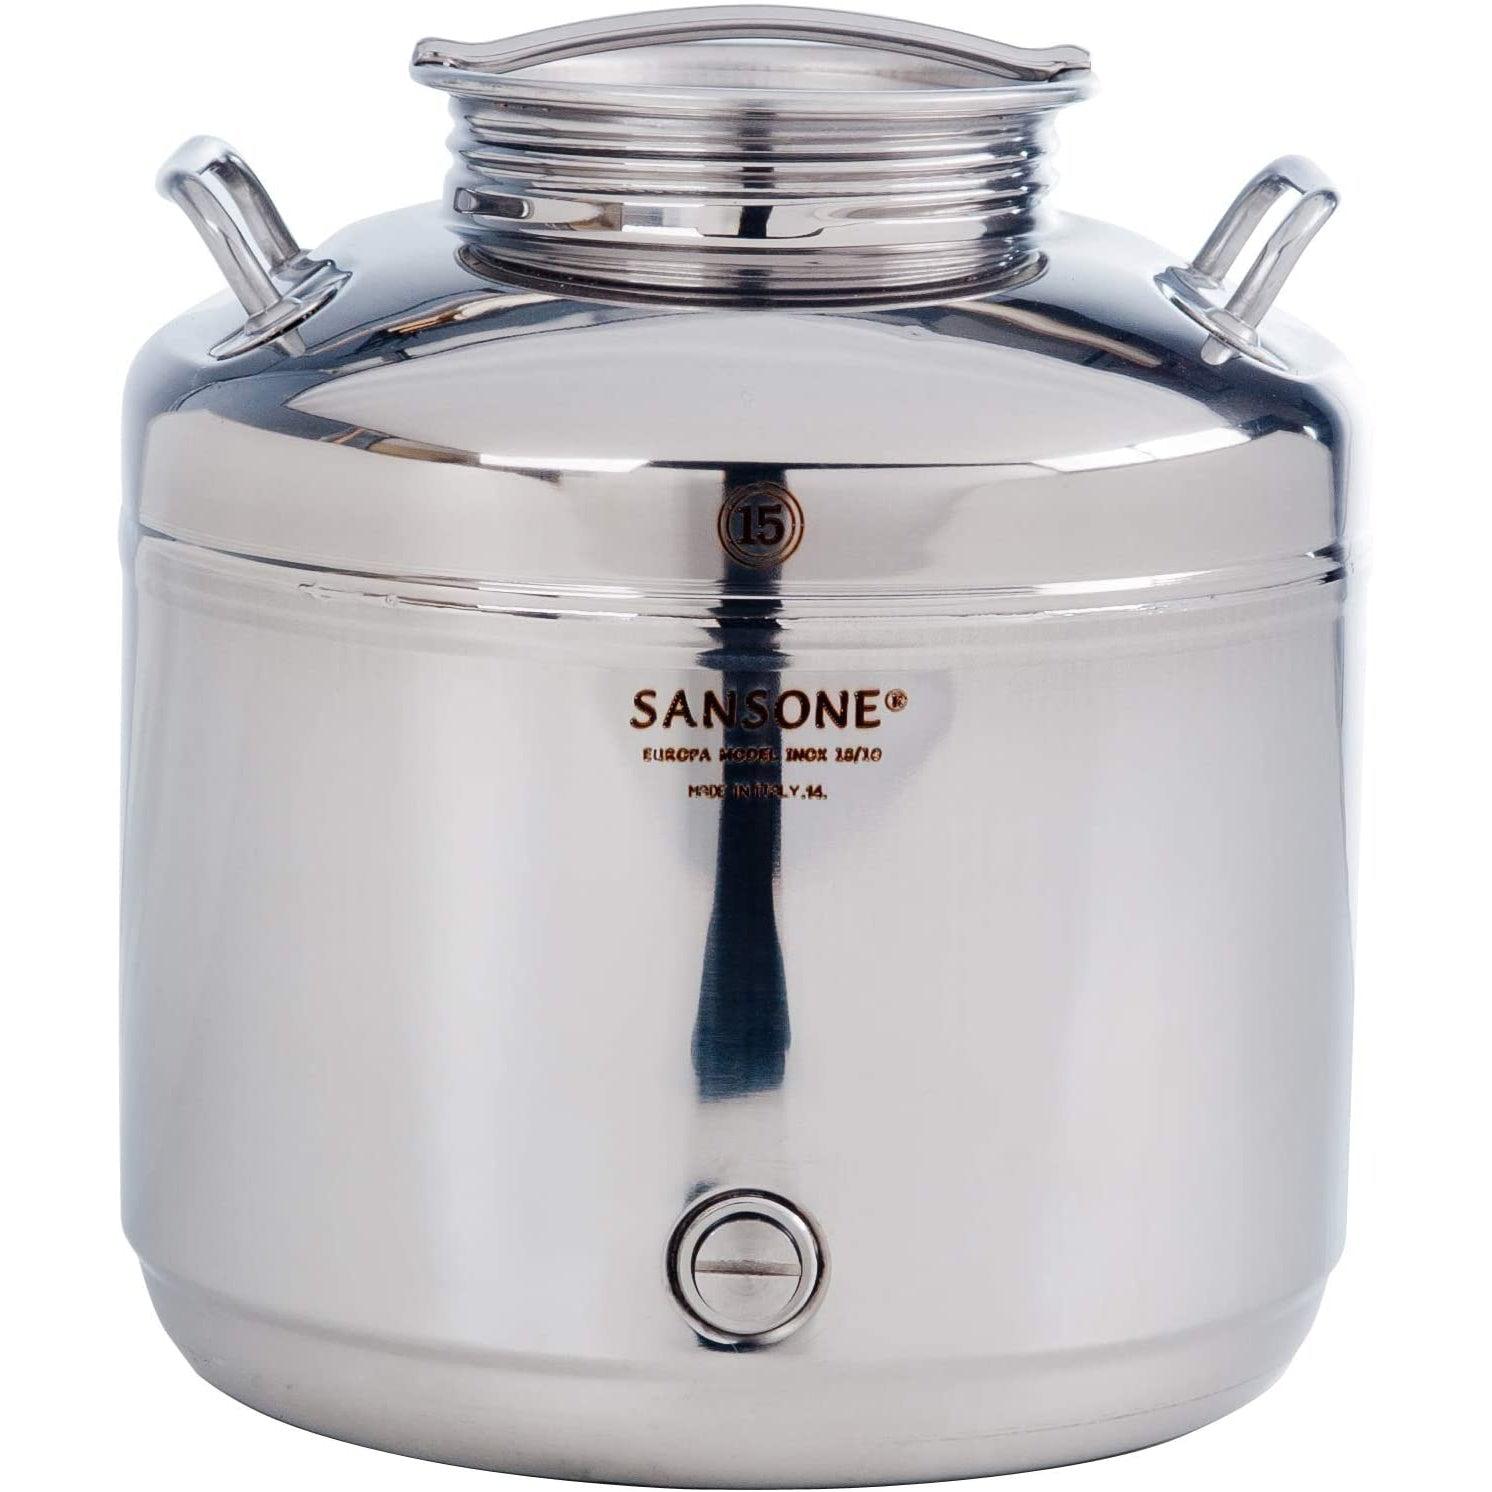 Sansone 3.96 gal Europa Fusti 18/10 Stainless Steel Canister - NSF Certified for Holding Olive Oil and More - Made in Italy